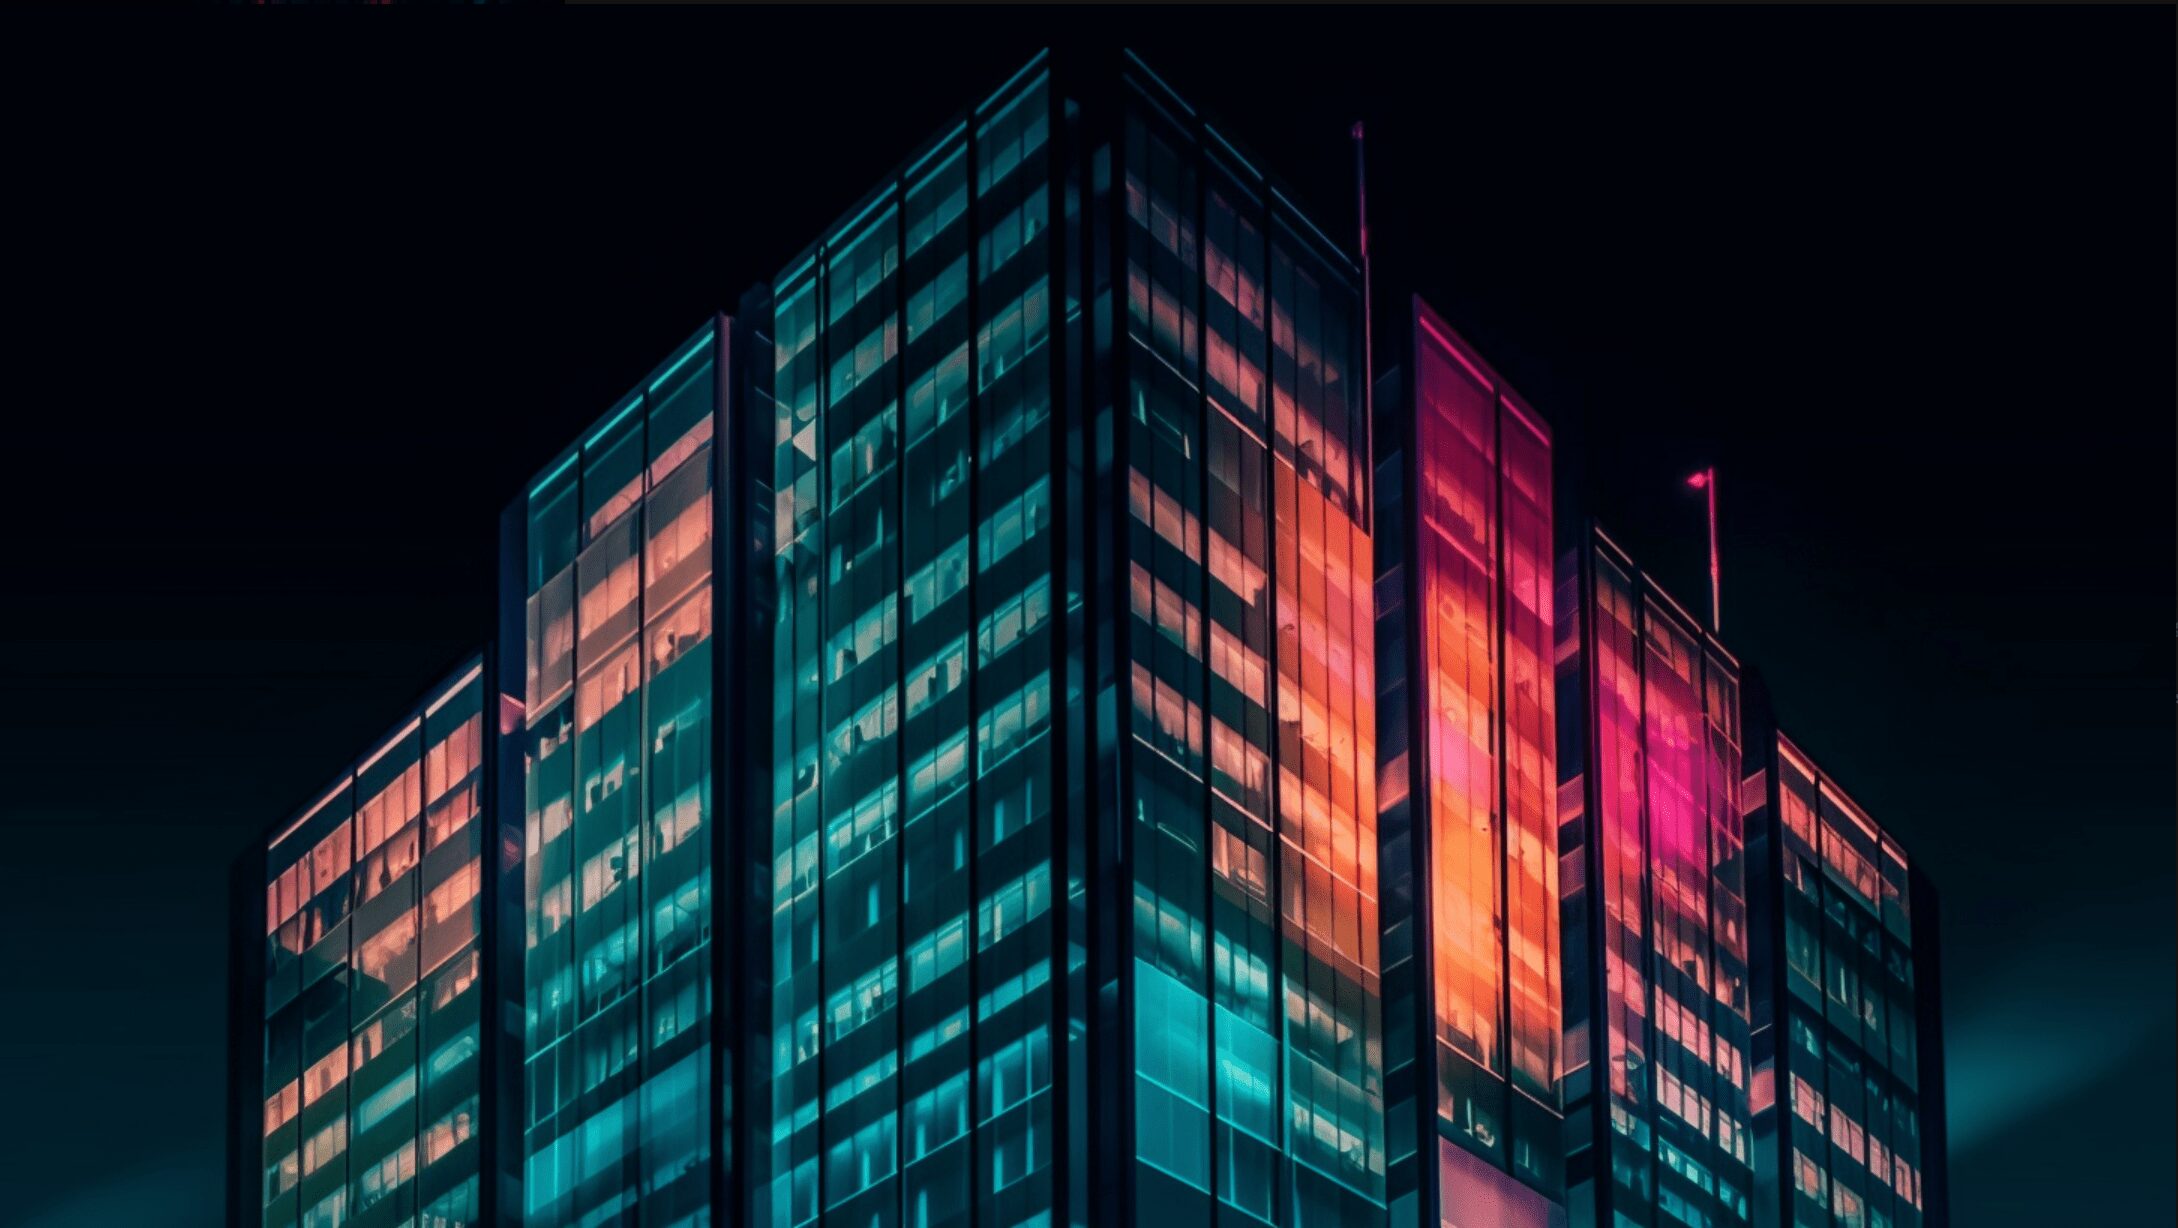 a brightly lit skyscraper with glass windows. bright colors shining through the window to make the building look multi-colored.